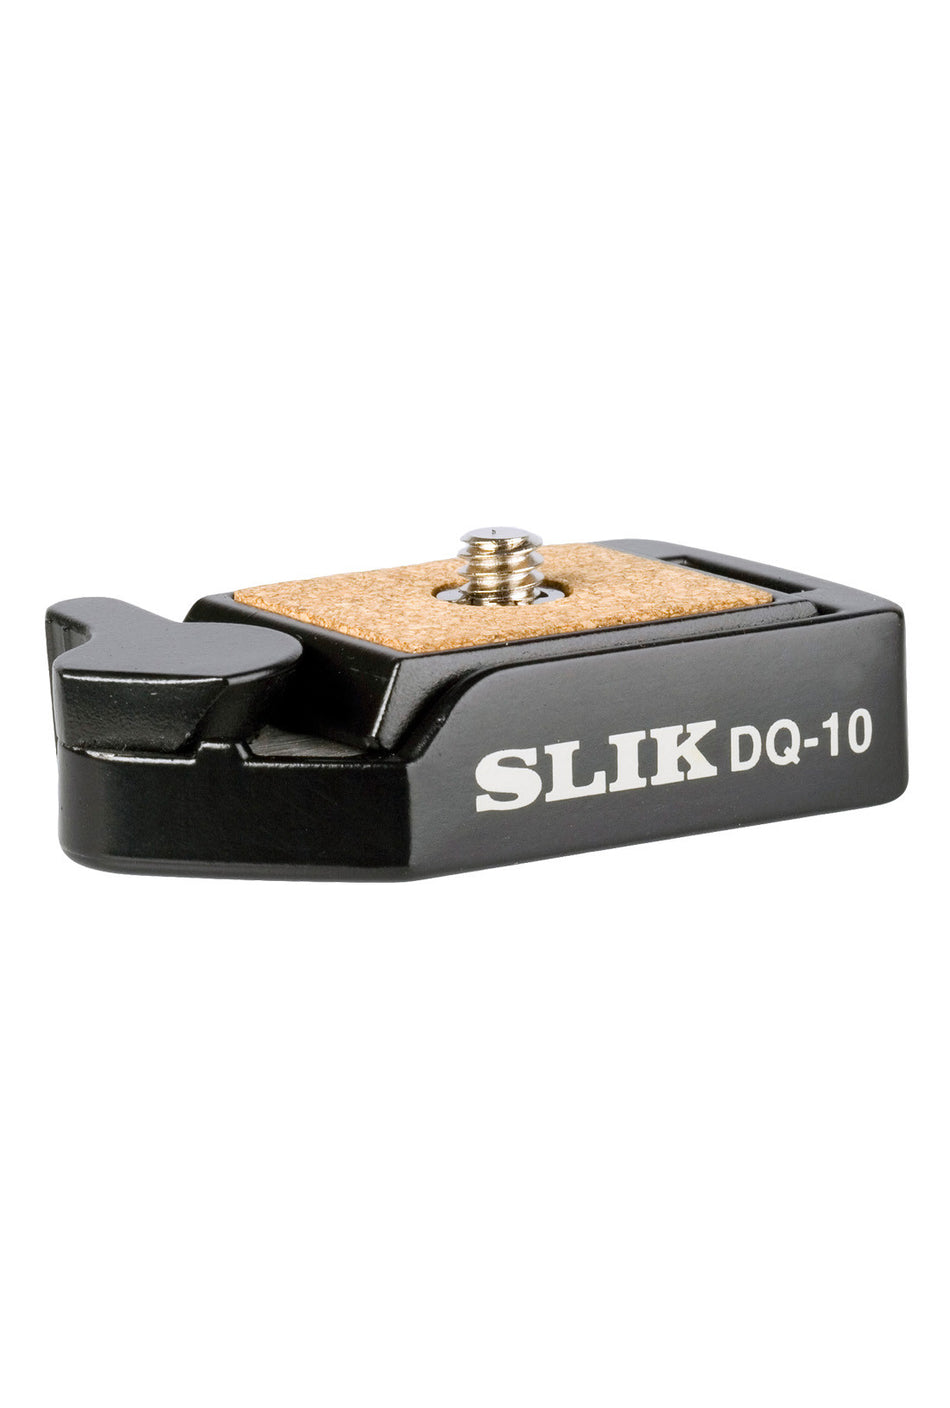 SLIK DQ-10 Quick Release Adapter (Small)